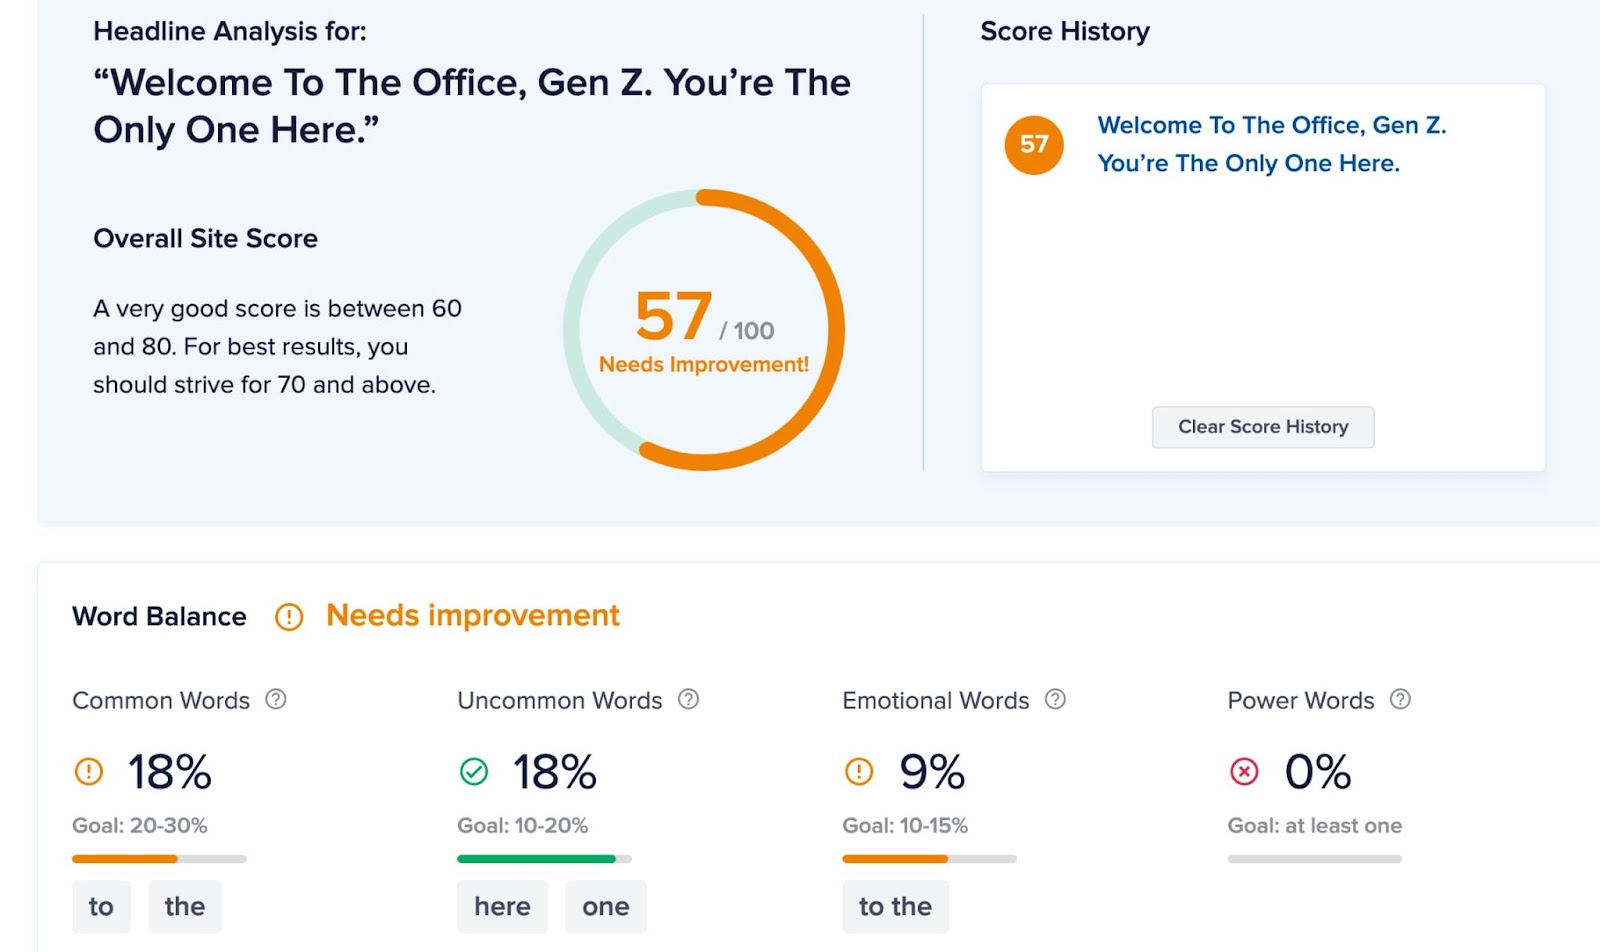 AIO SEO’s headline analyzer results for “Welcome to the office, Gen Z. You’re the only one here.”